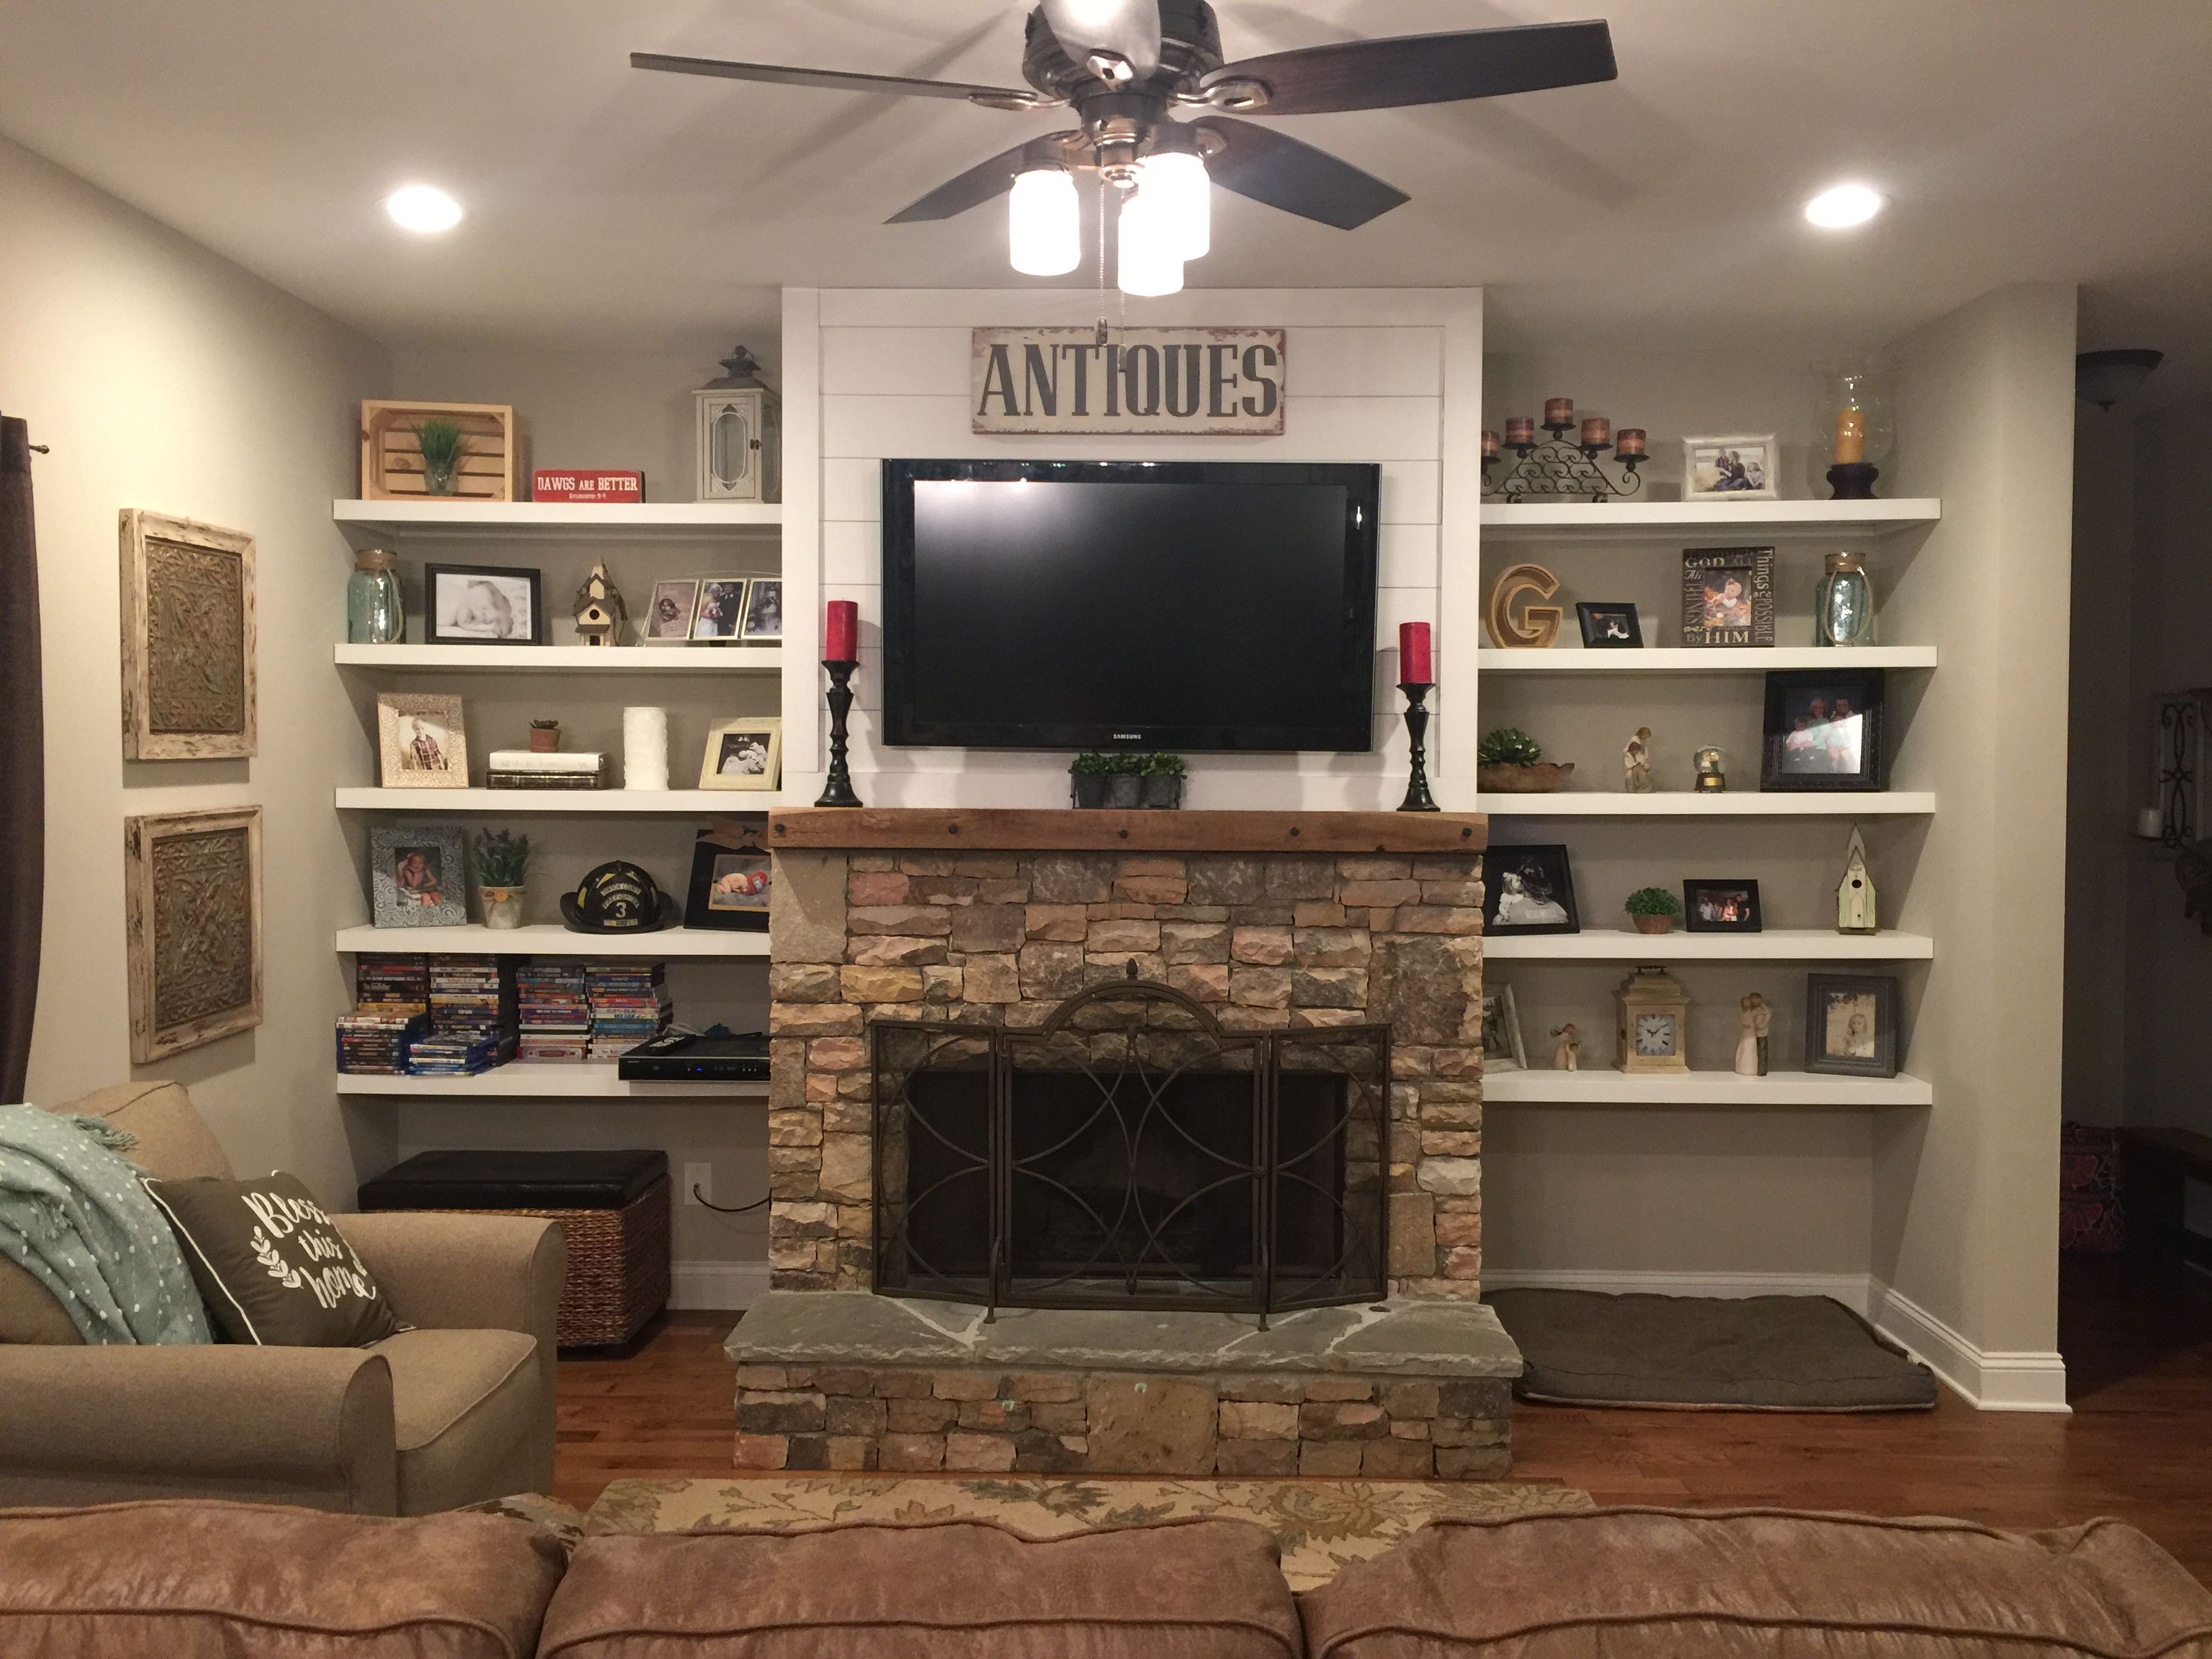 Diy Fireplace Ideas New Stacked Rock Fireplace Barnwood Mantel Shiplap top with